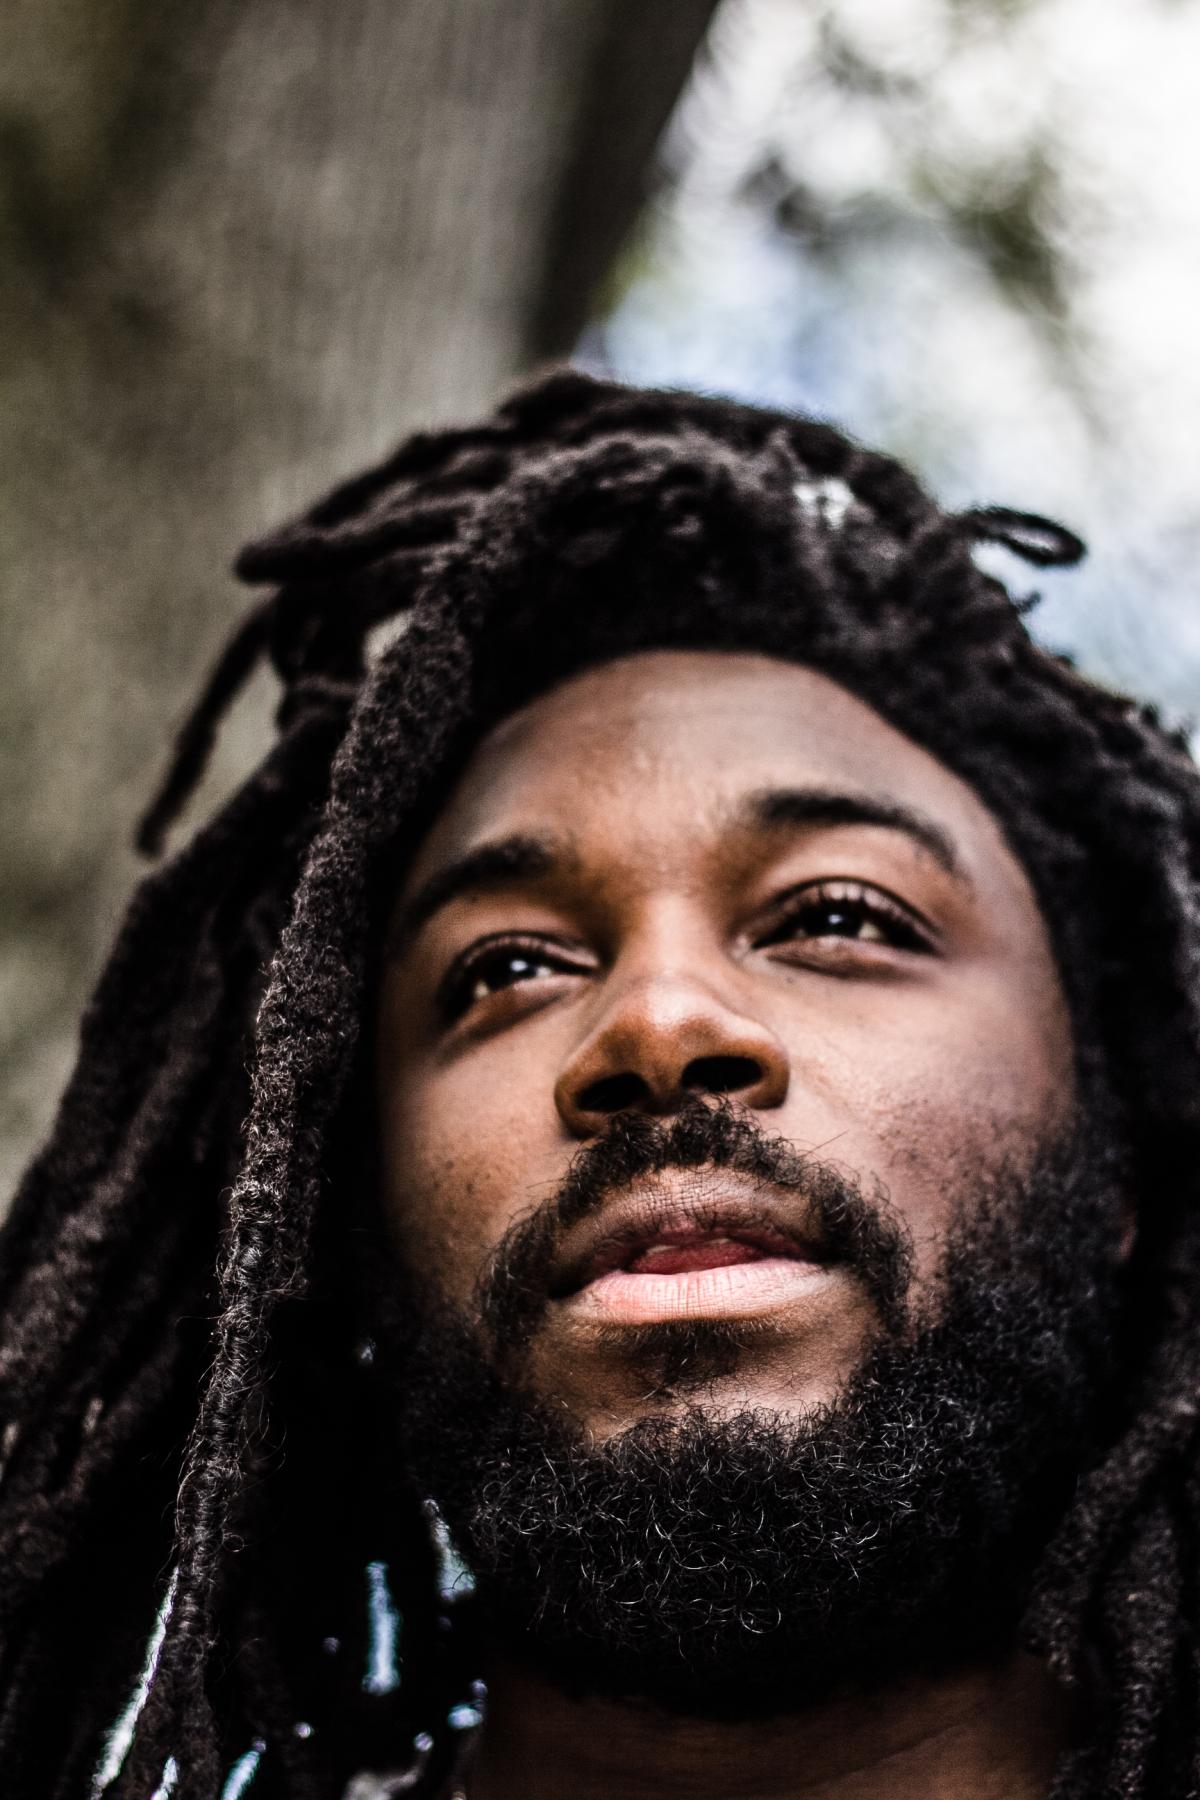 Author photo for Jason Reynolds photo by kia chenelle 